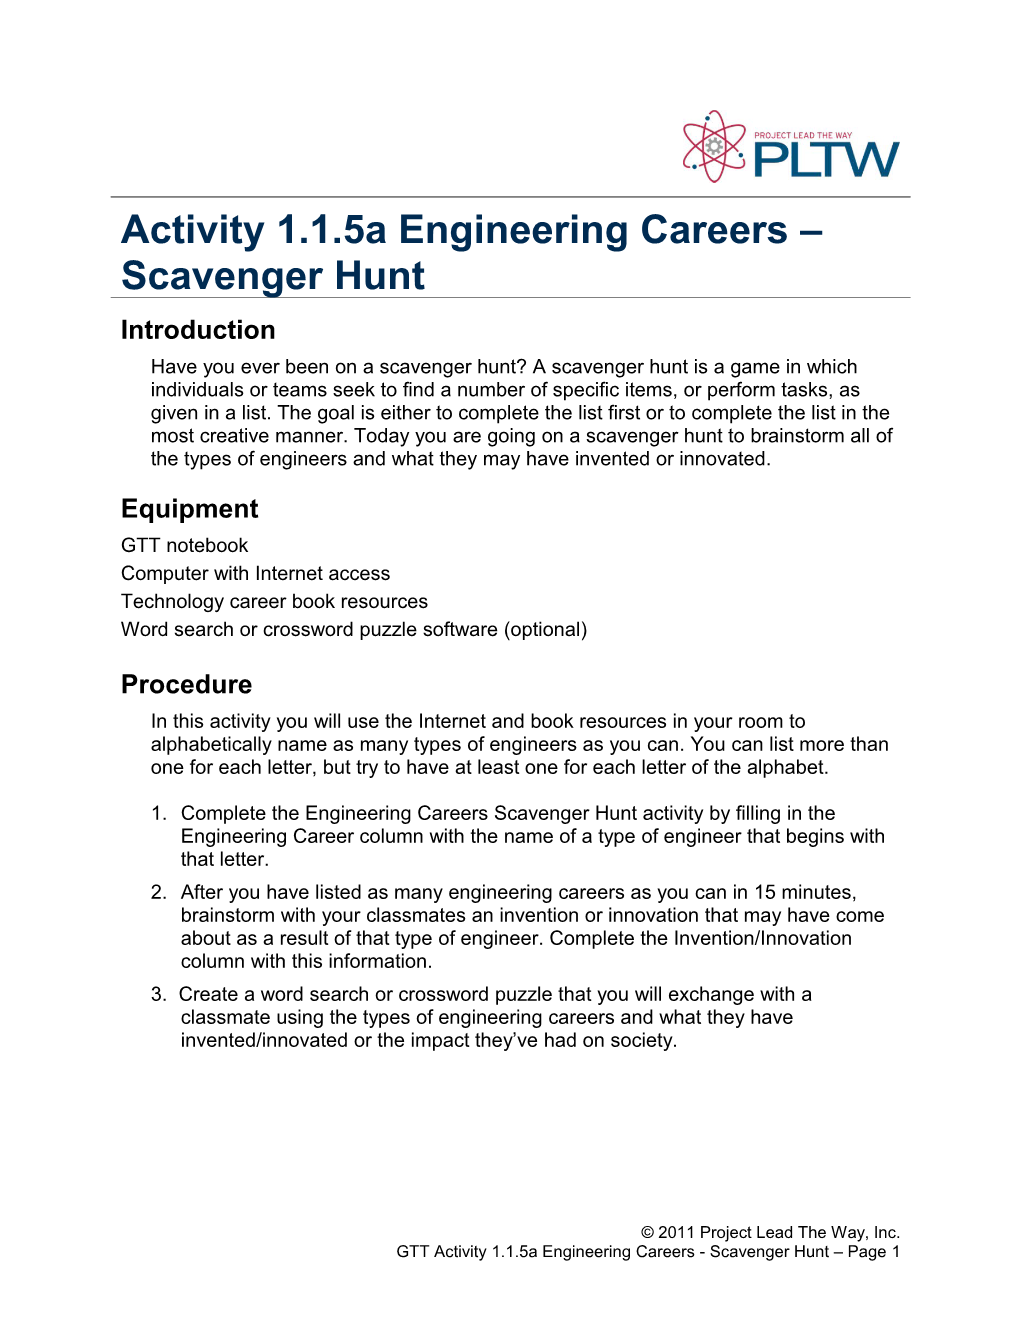 Activity 1.1.5A Engineering Careers - Scavenger Hunt s1